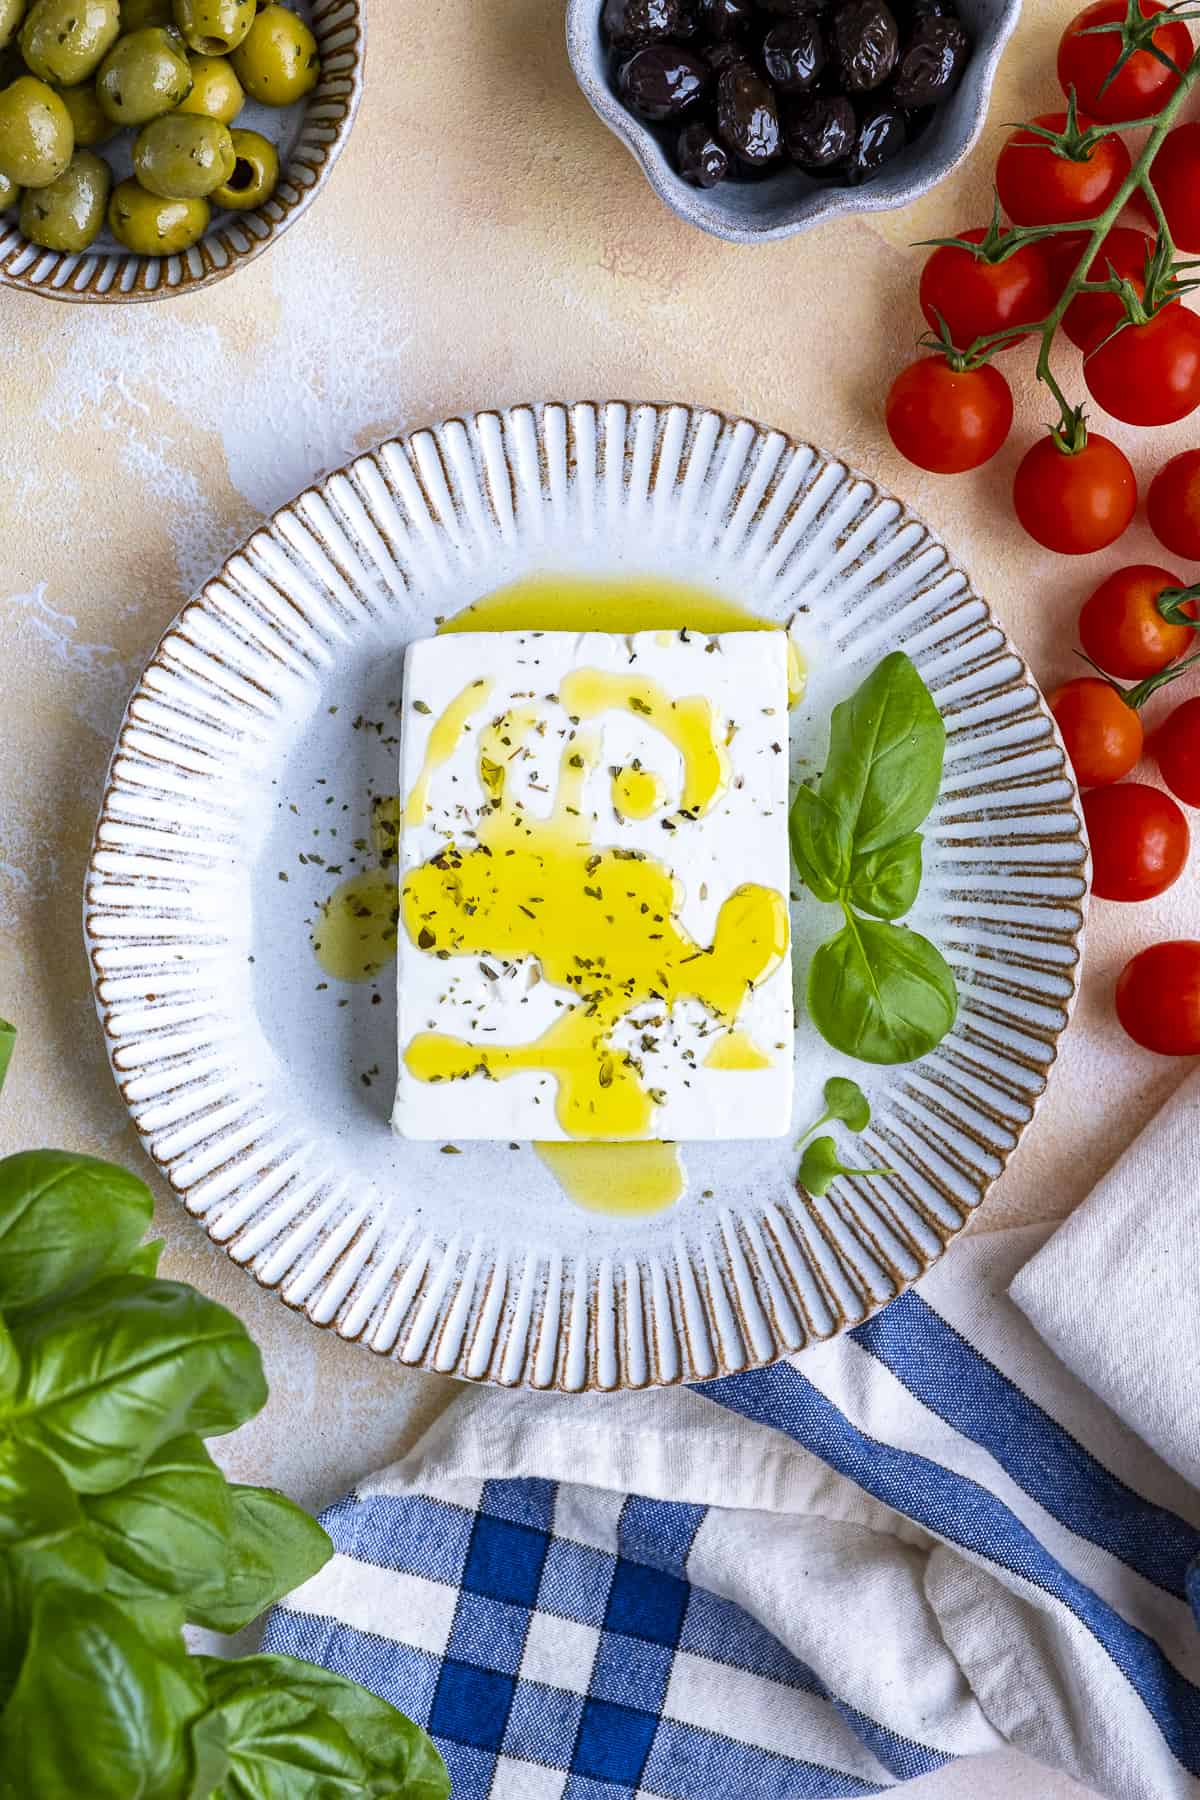 A block of feta cheese garnished with oregano, olive oil and fresh basil on a white plate.